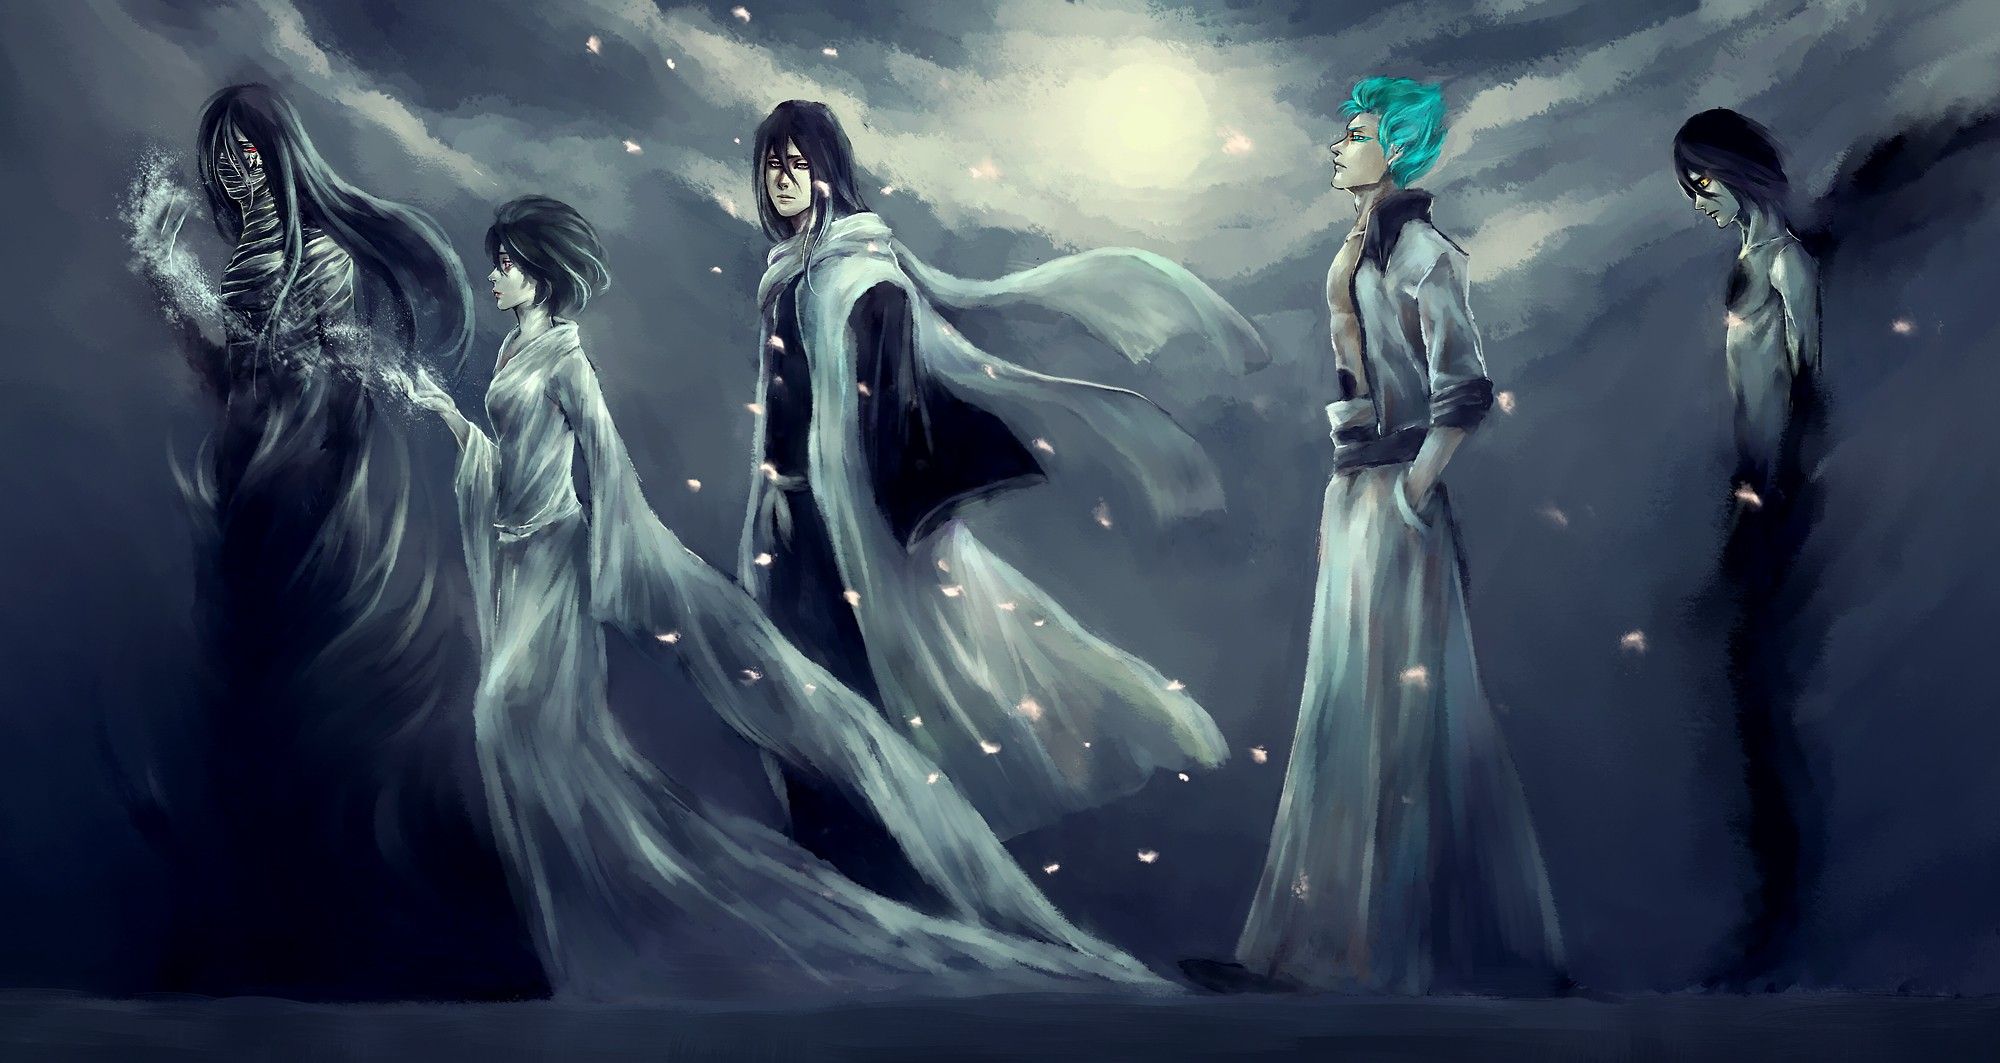 Top 10 Best Bleach Wallpapers HD  Anime, Bleach pictures, Bleach characters